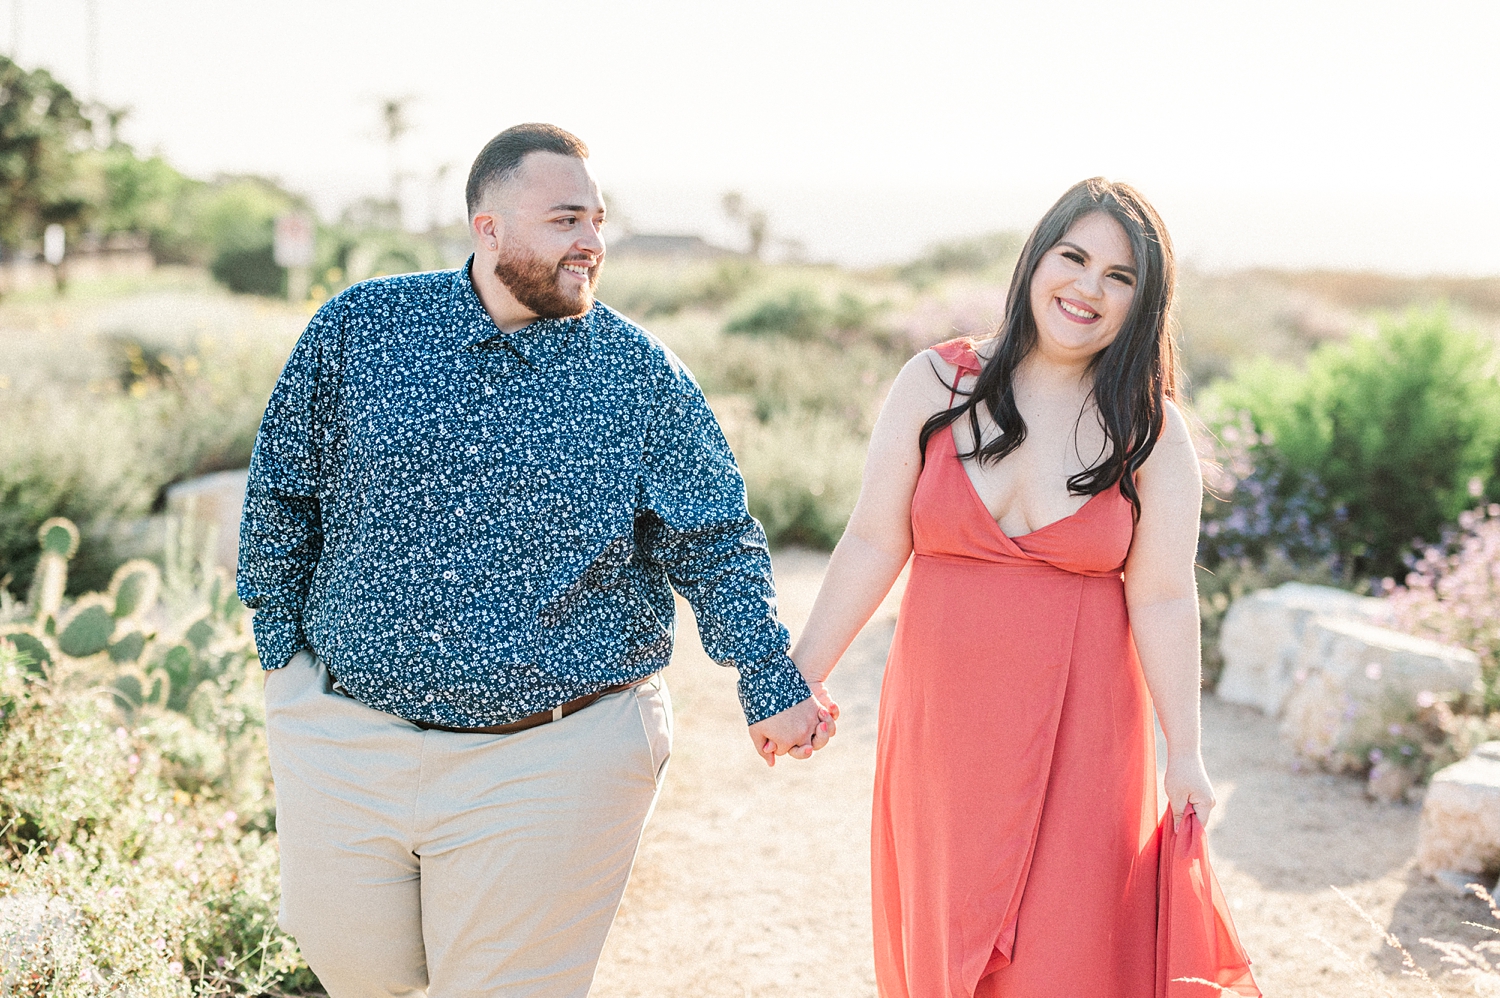 Beach Cliffs Engagement Session at Sunset | Nataly Hernandez Photography | Edwin and Susana-28.jpg